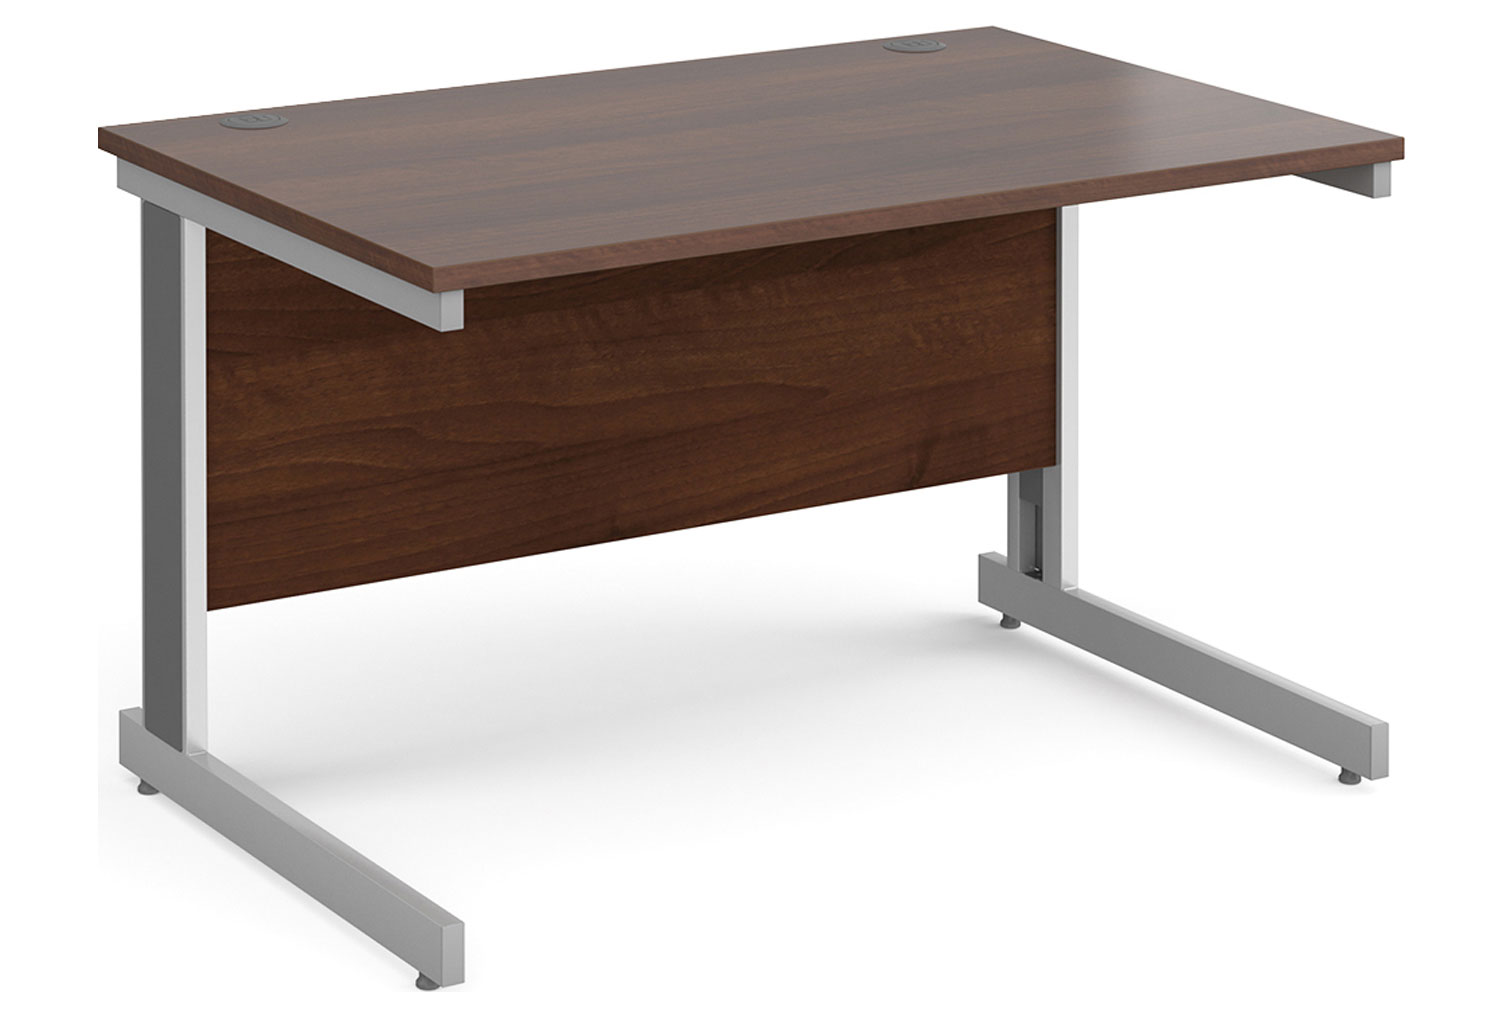 All Walnut Deluxe Rectangular Office Desk, 120wx80dx73h (cm), Express Delivery